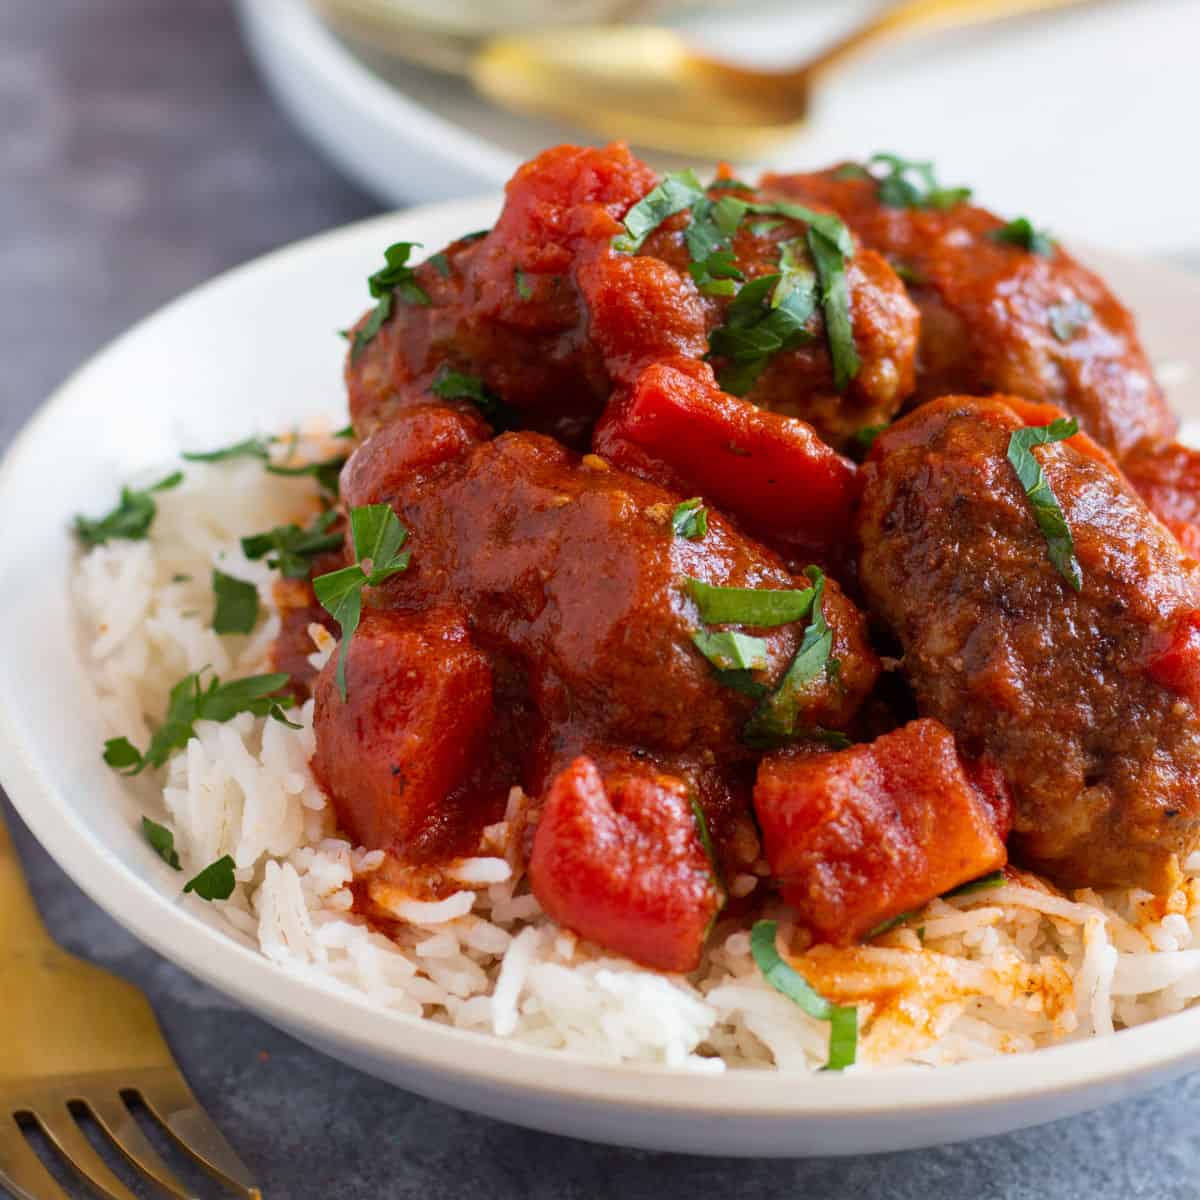 Soutzoukakia also known as Greek baked meatballs in tomato sauce is a classic recipe that's full of flavor. Juicy meatballs cooked in a flavorful rich tomato sauce makes the perfect recipe. Follow along for all my tips and tricks to make the juiciest meatballs!
